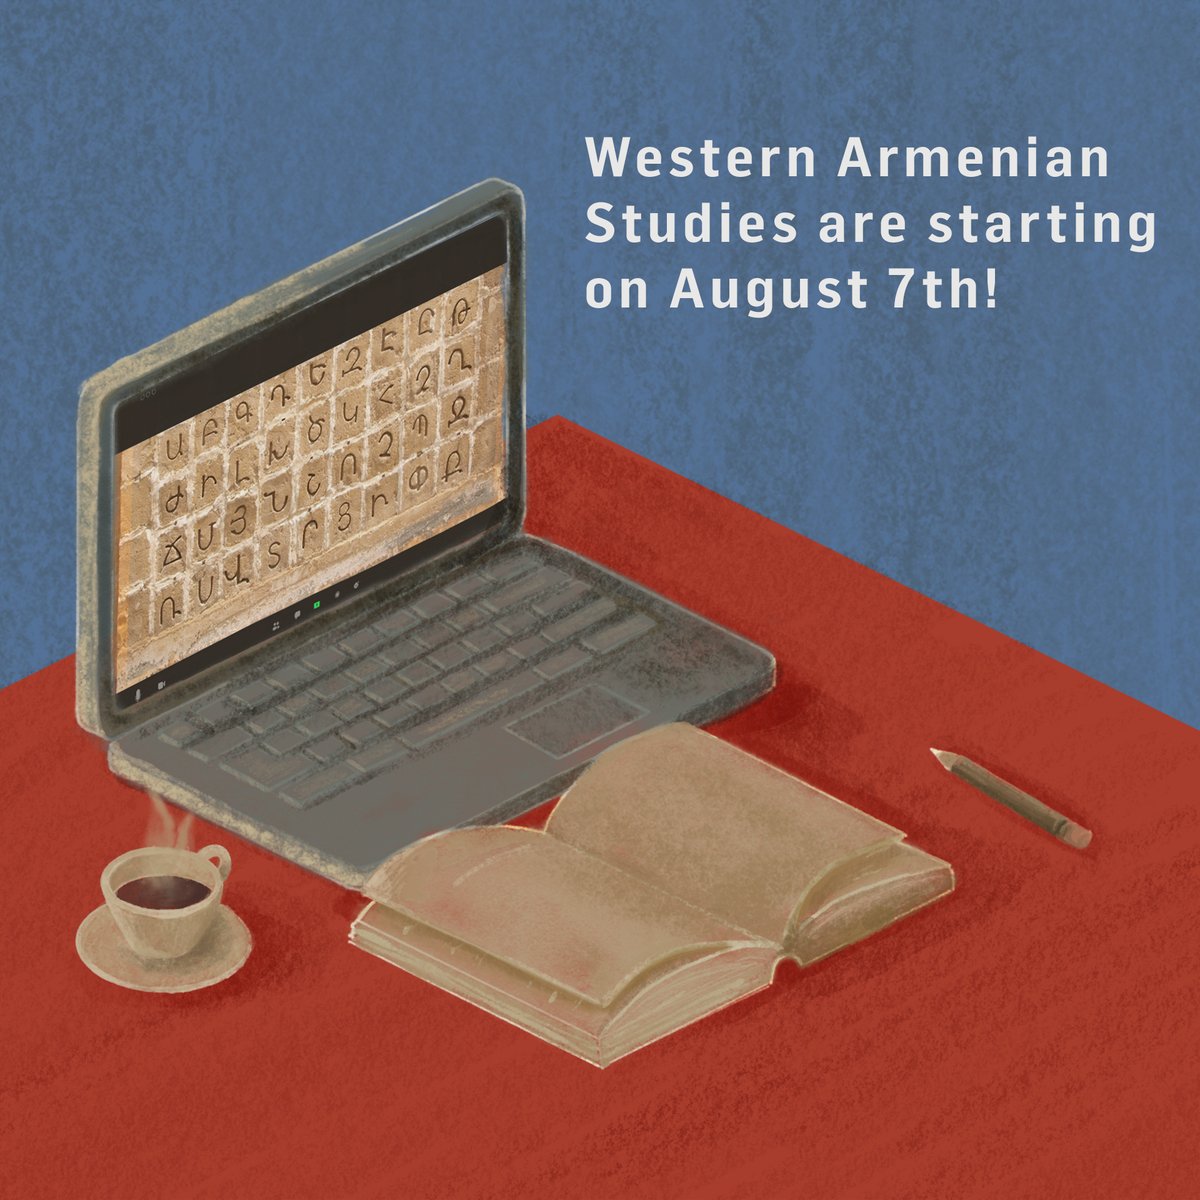 Online Western Armenian Studies are starting on August 7th. For more details and registration: bit.ly/44LOCwU